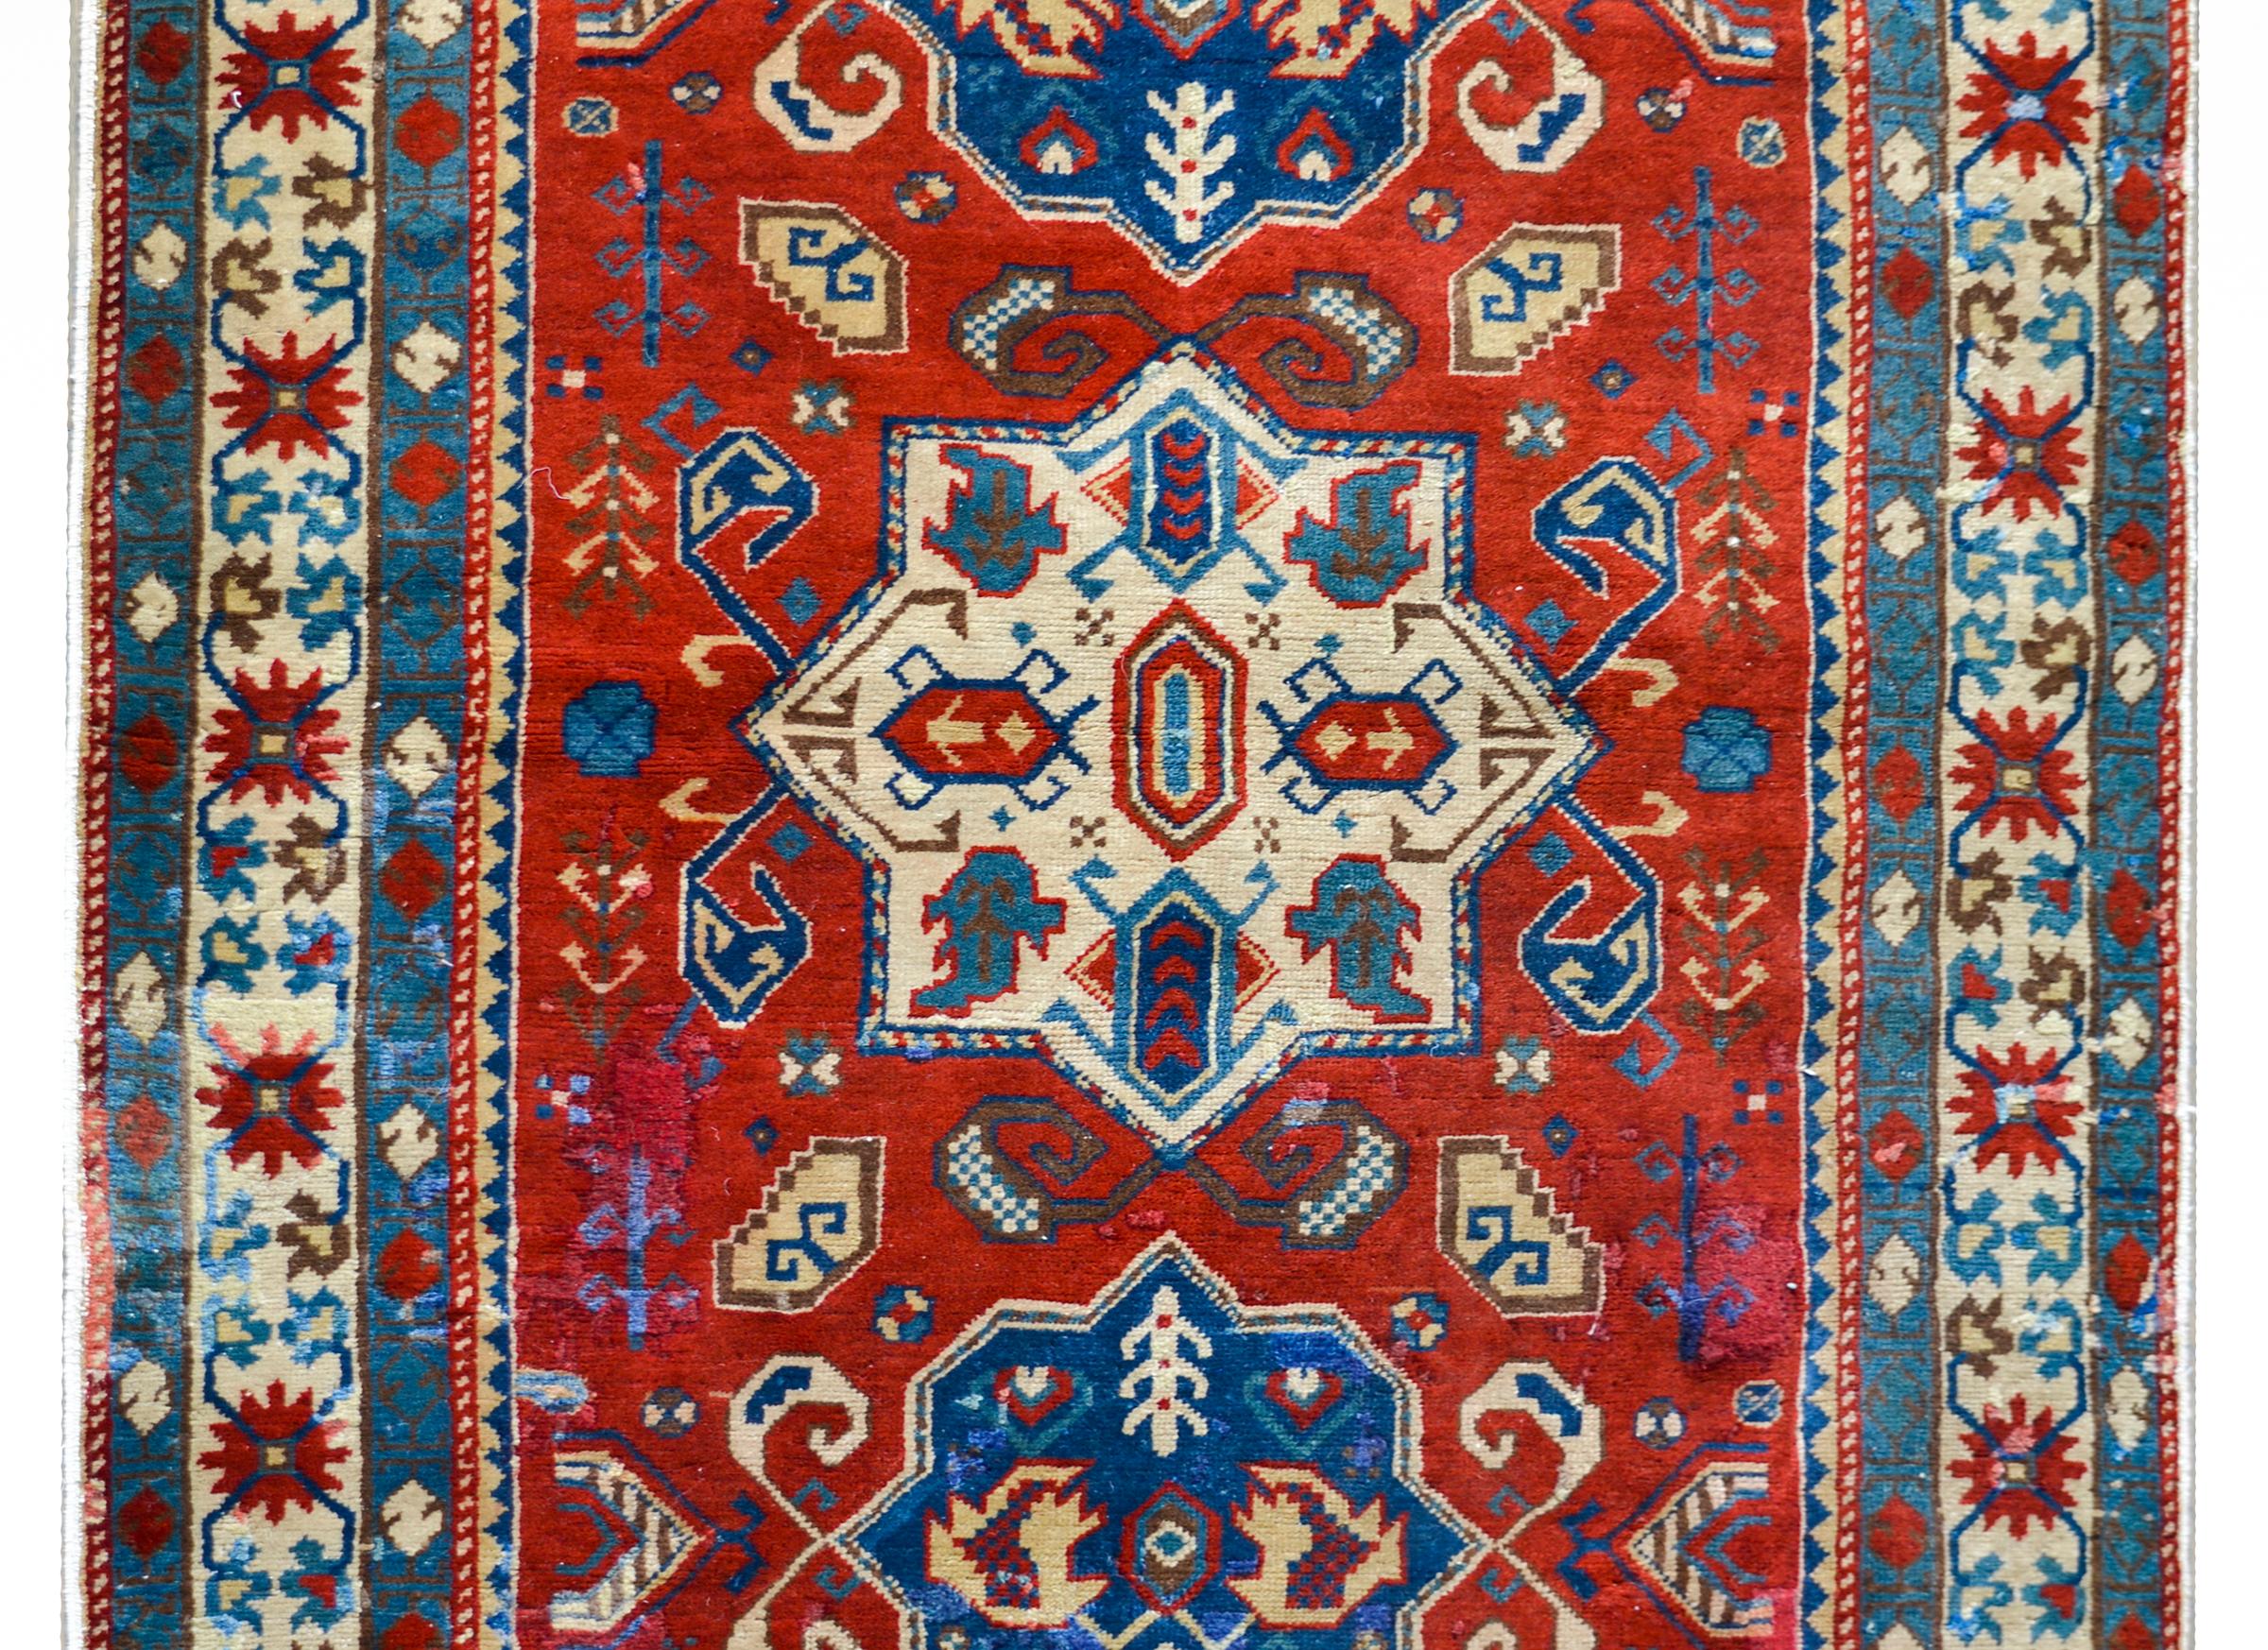 A wonderfully bold vintage Anatolian Turkish rug with three large central floral medallions, each with more leaves and flowers, and living amidst a field of more flowers and leaves, all surrounded by three petite floral partnered stripe borders.